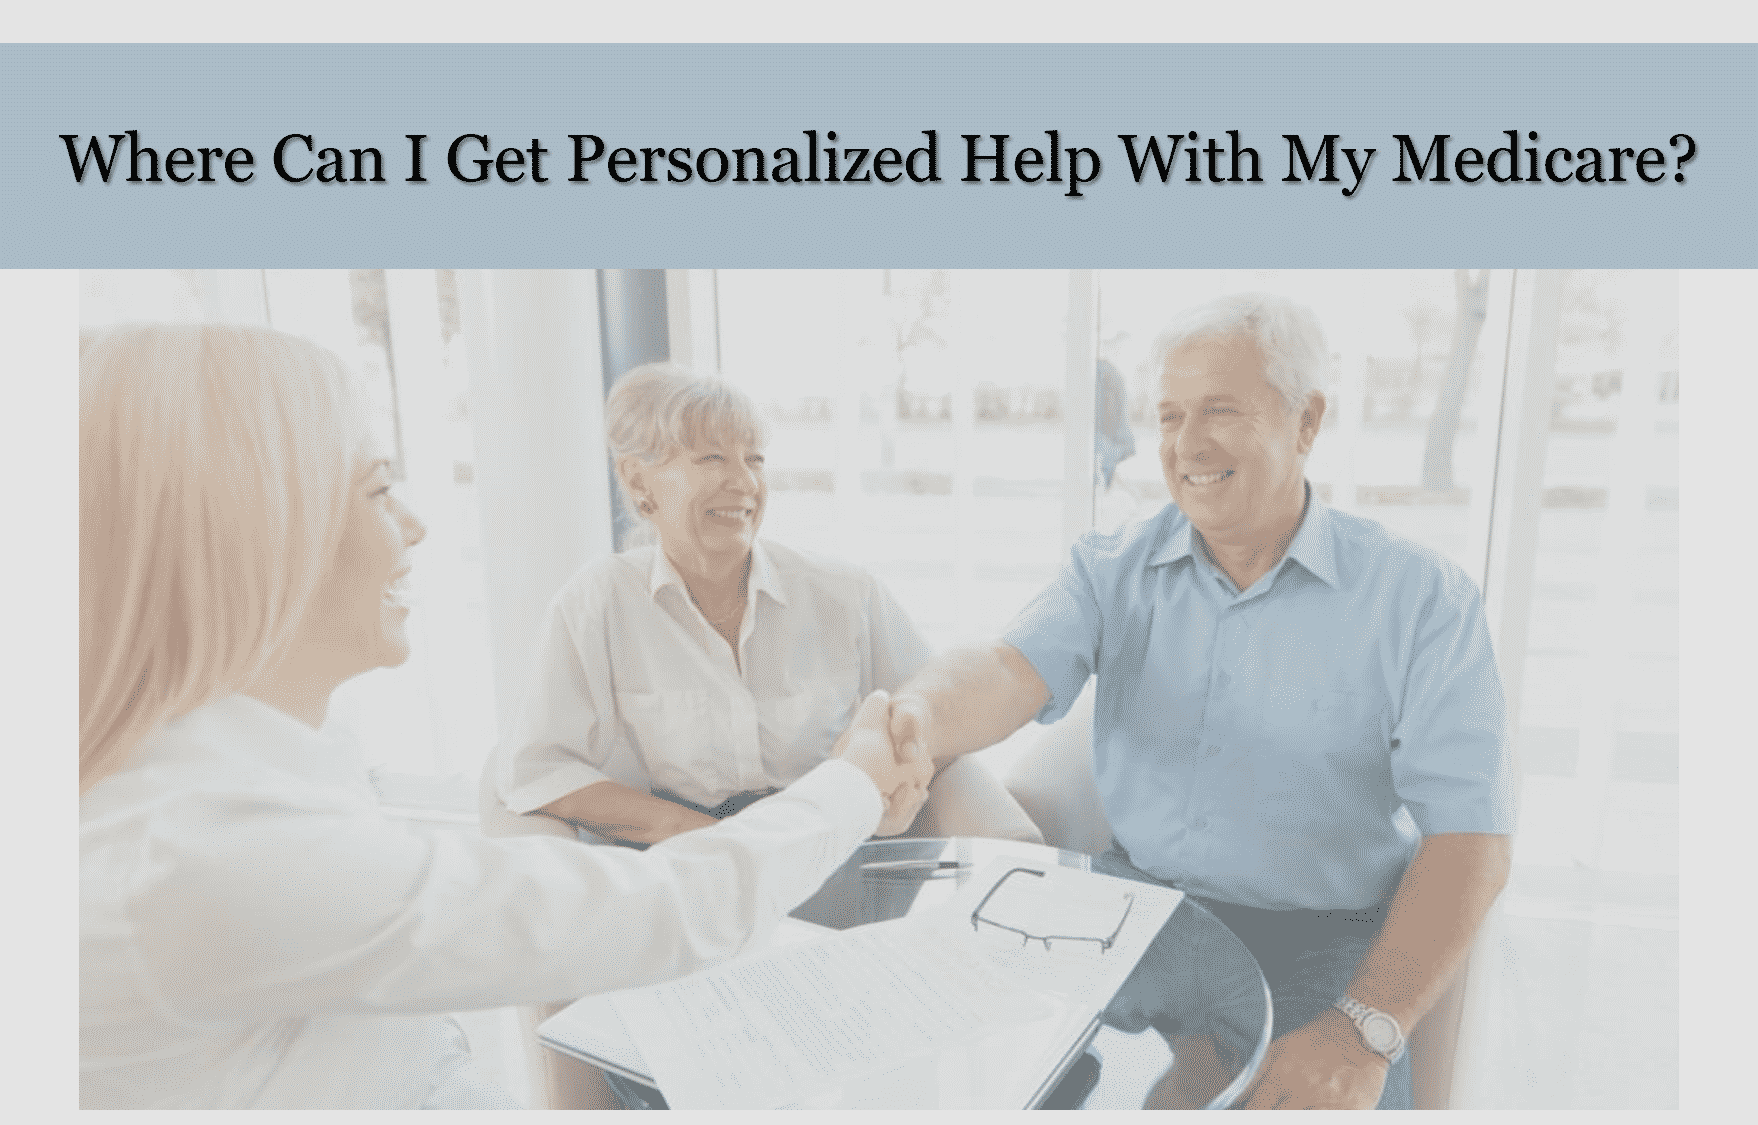 Where Can I Get Personalized Help With My Medicare?